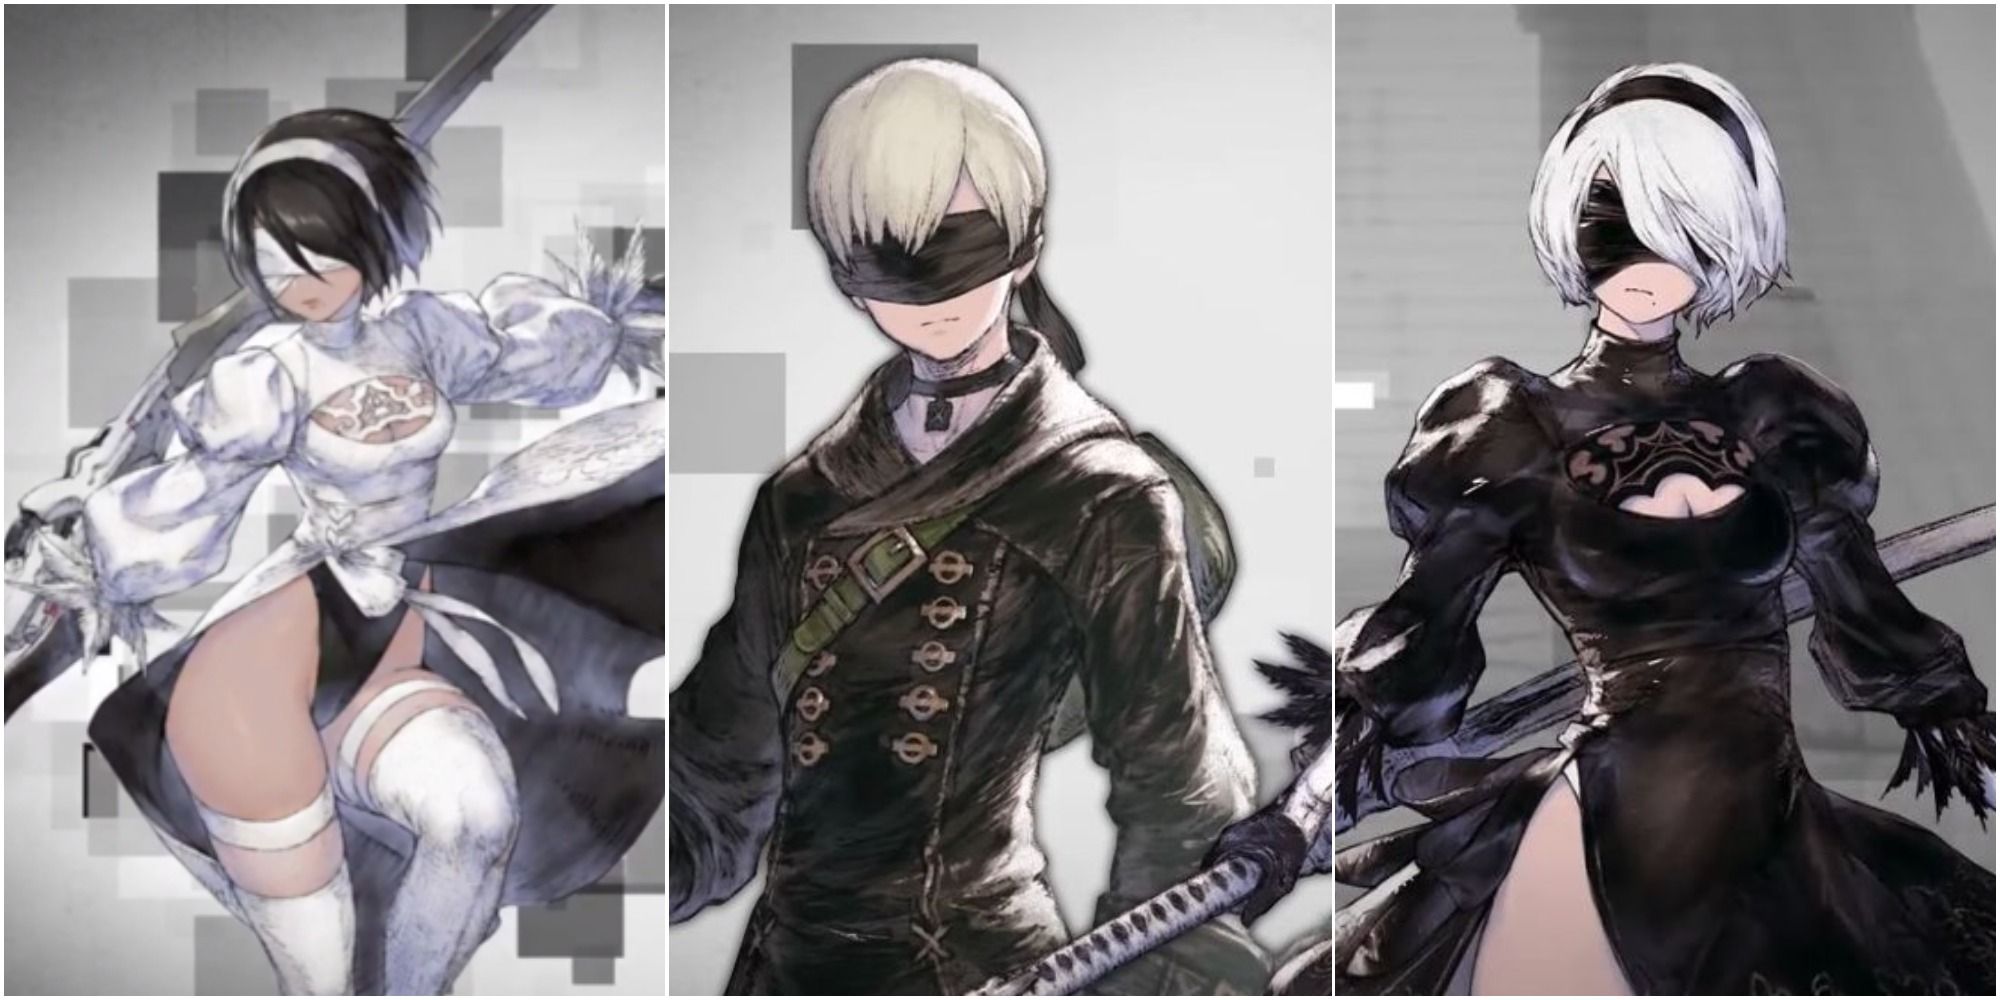 Nier Reincarnation Tier List - Characters, Weapons, and How To Reroll